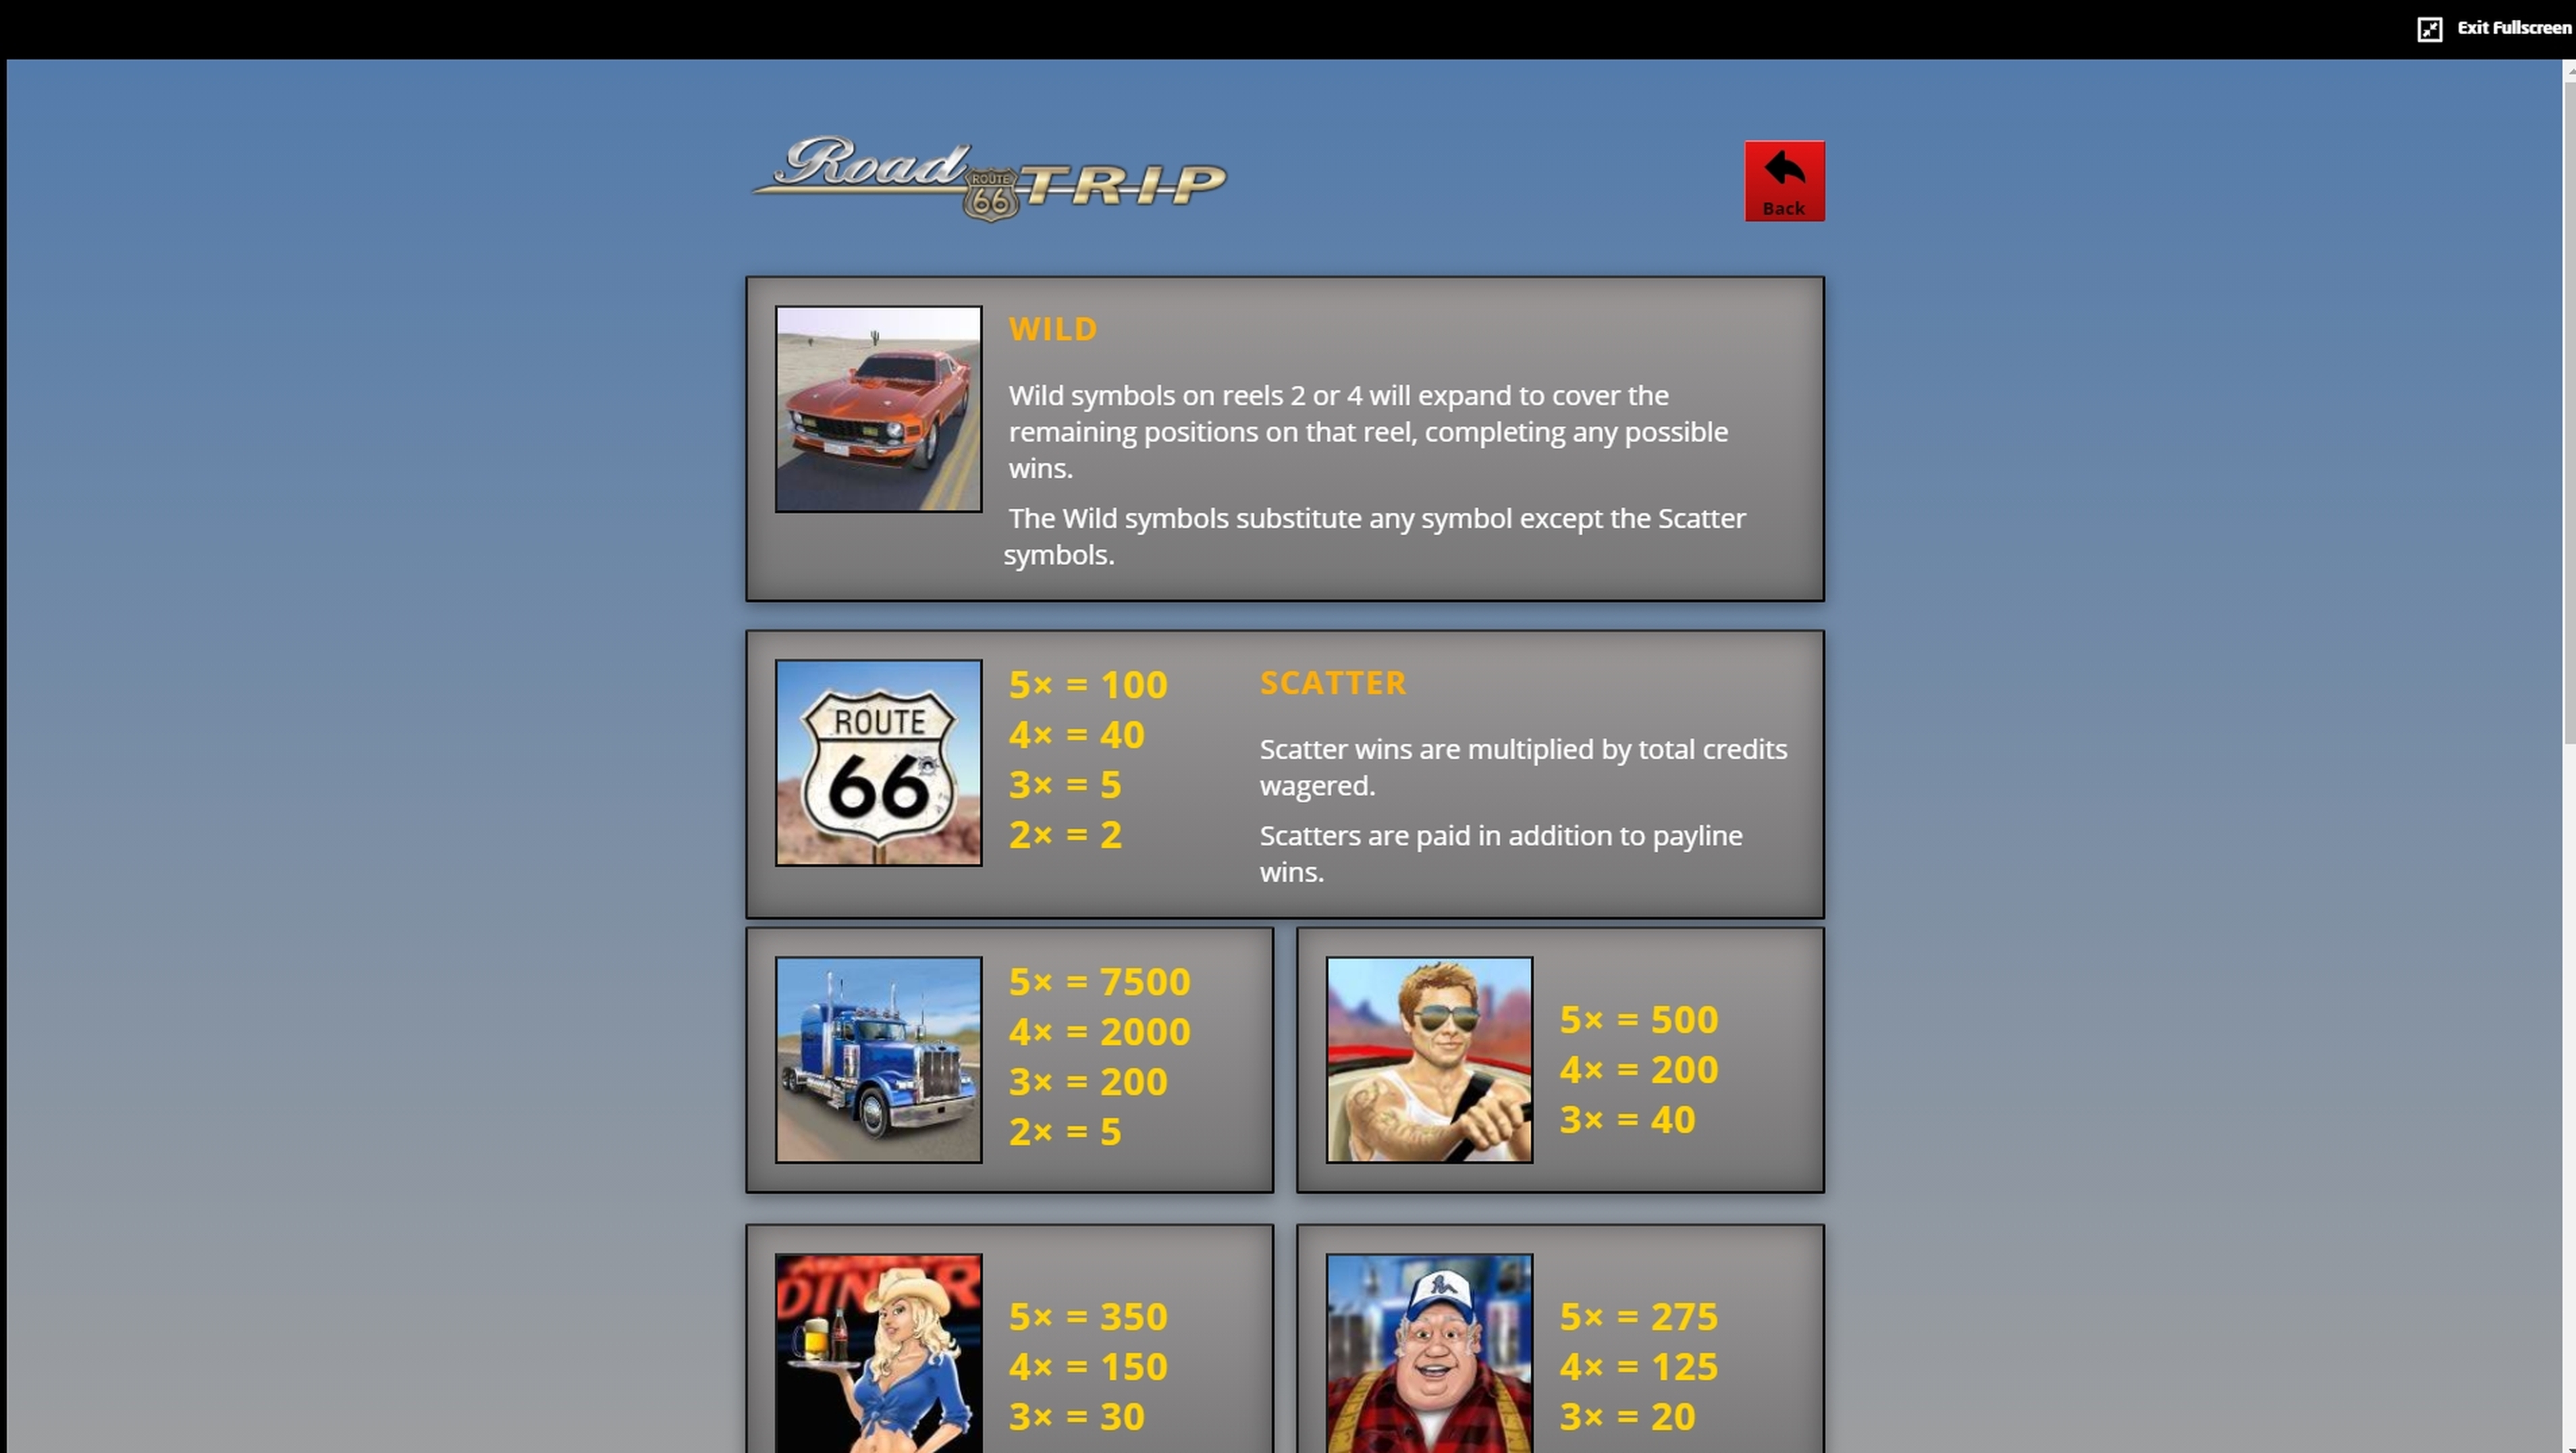 Info of Road Trip Slot Game by Genii